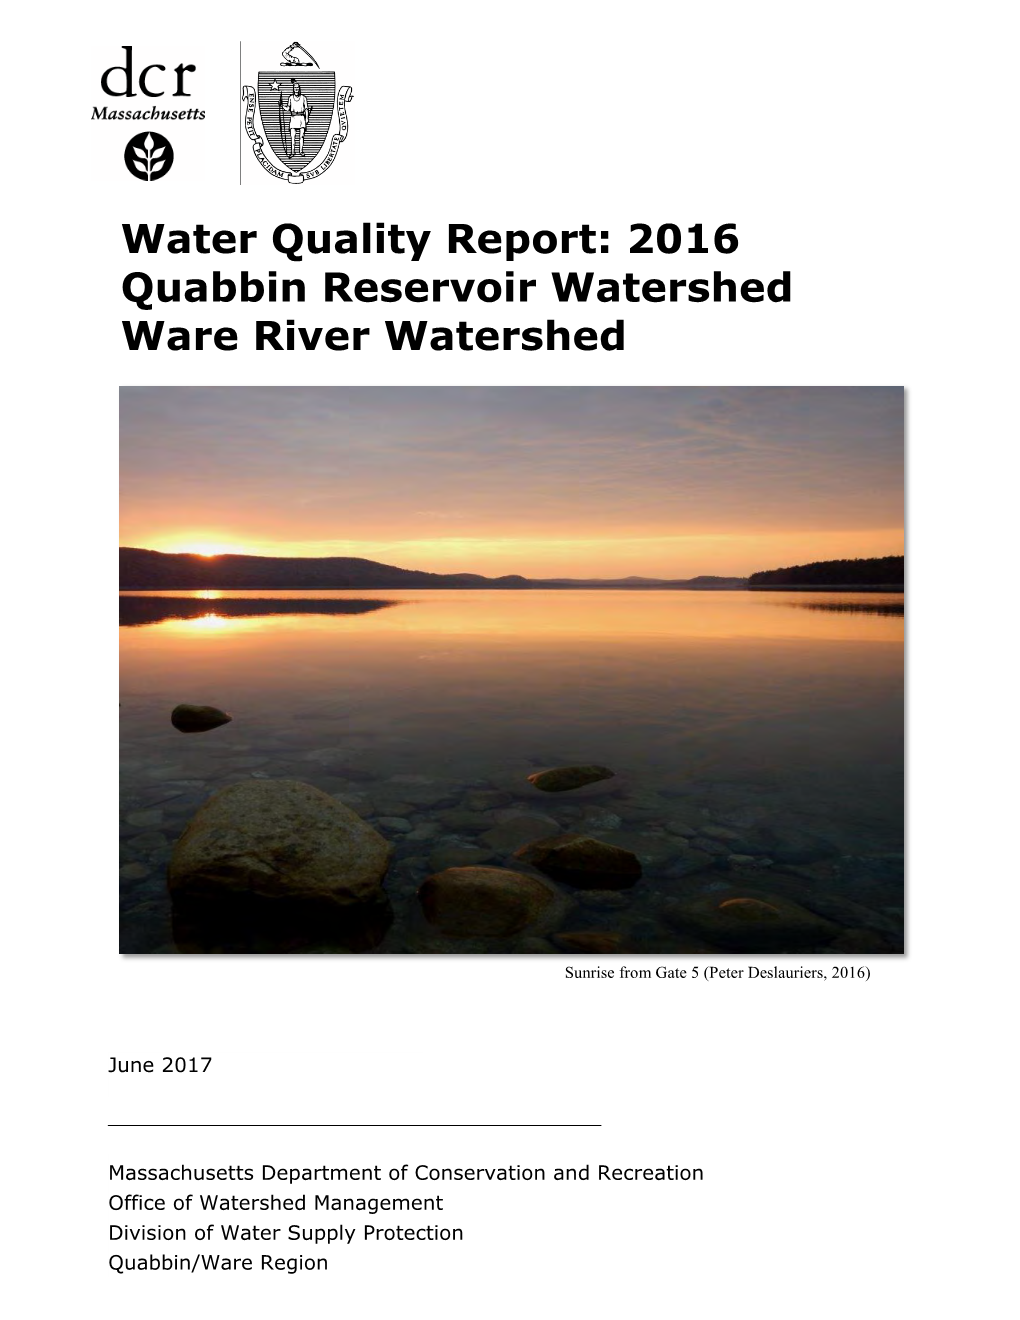 2016 Quabbin Reservoir and Ware River Water Quality